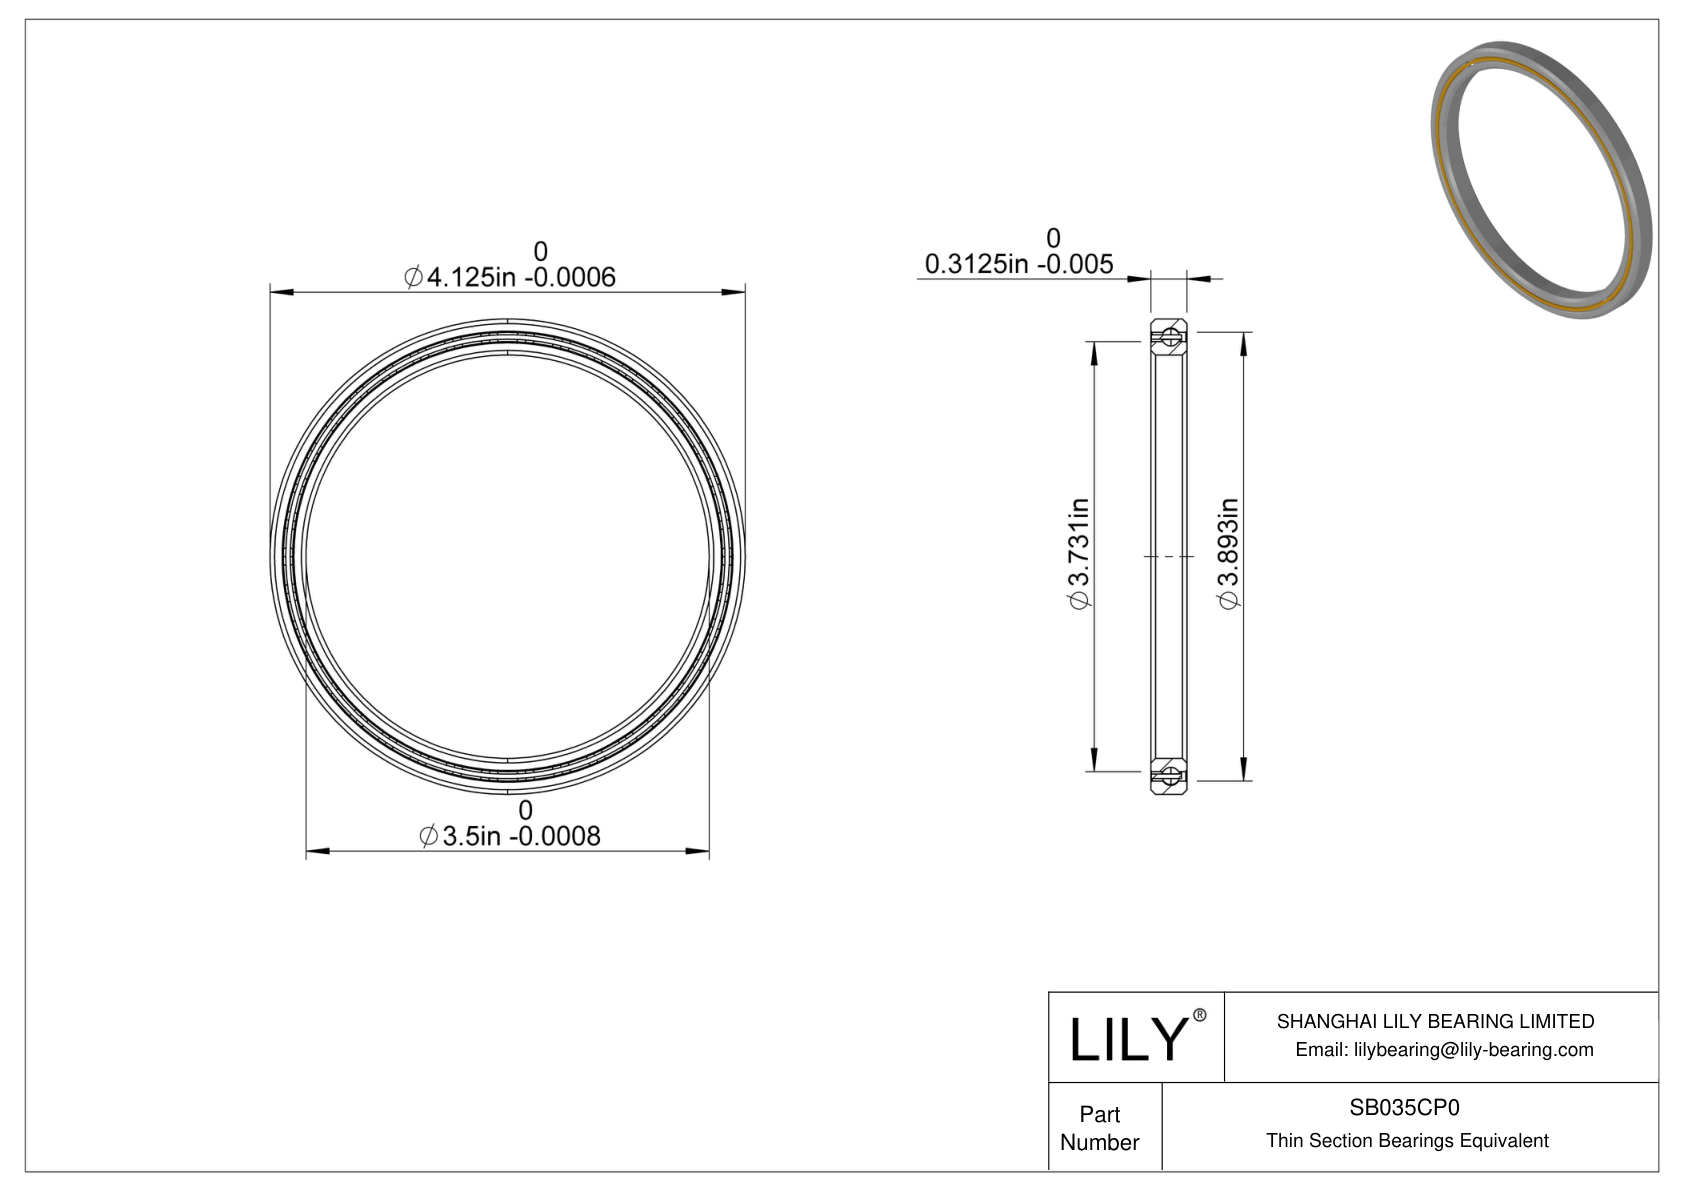 SB035CP0 Constant Section (CS) Bearings cad drawing